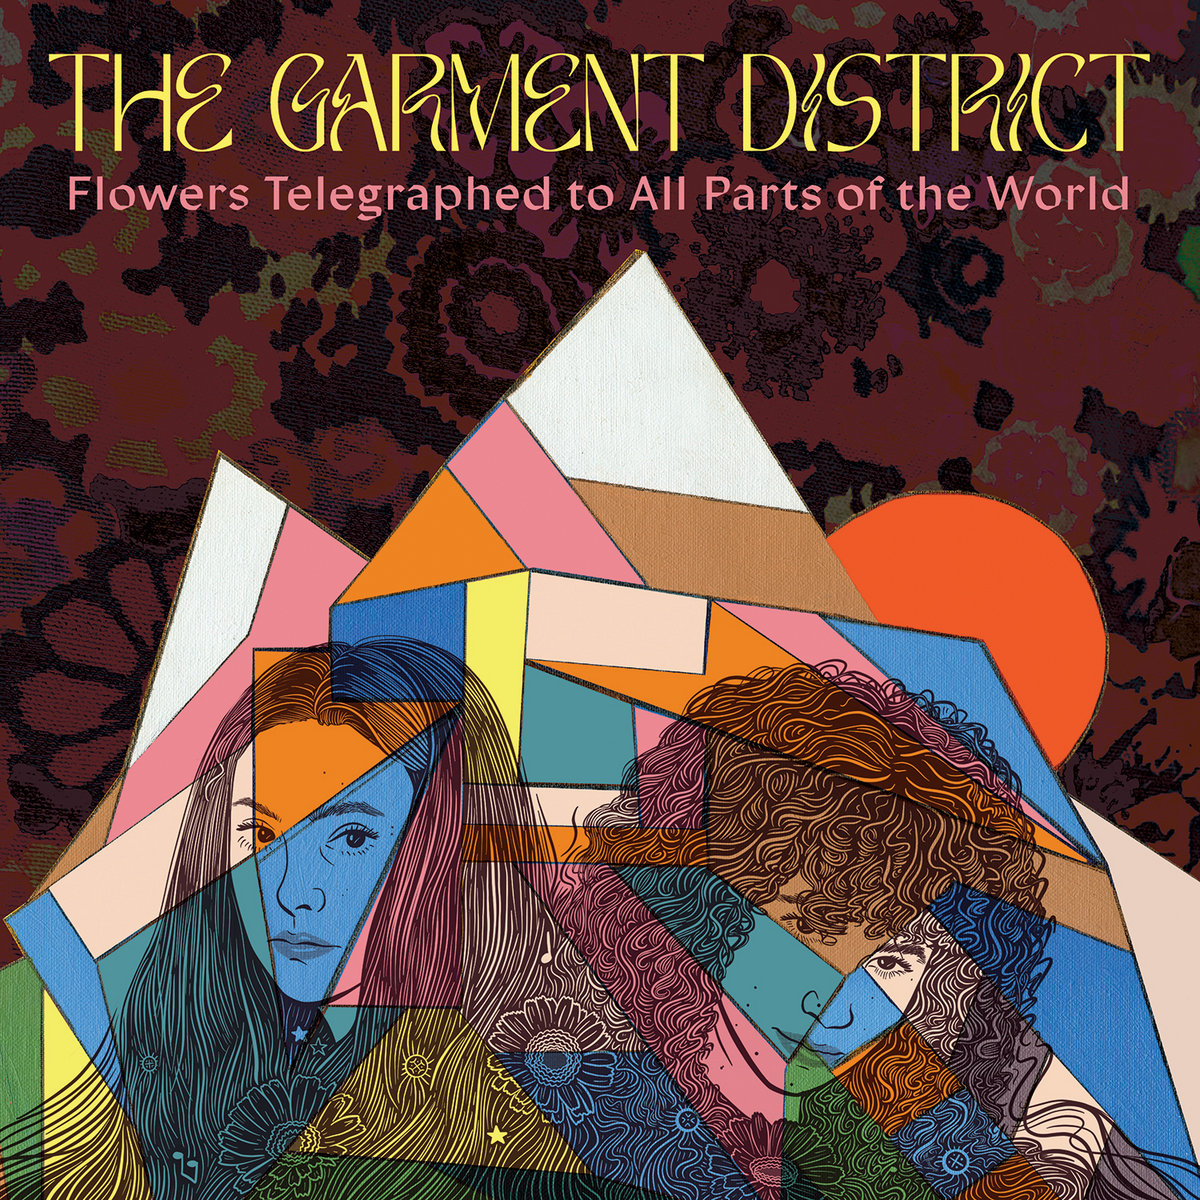 Album Review: Flowers Telegraphed to All Parts of The World by The Garment District